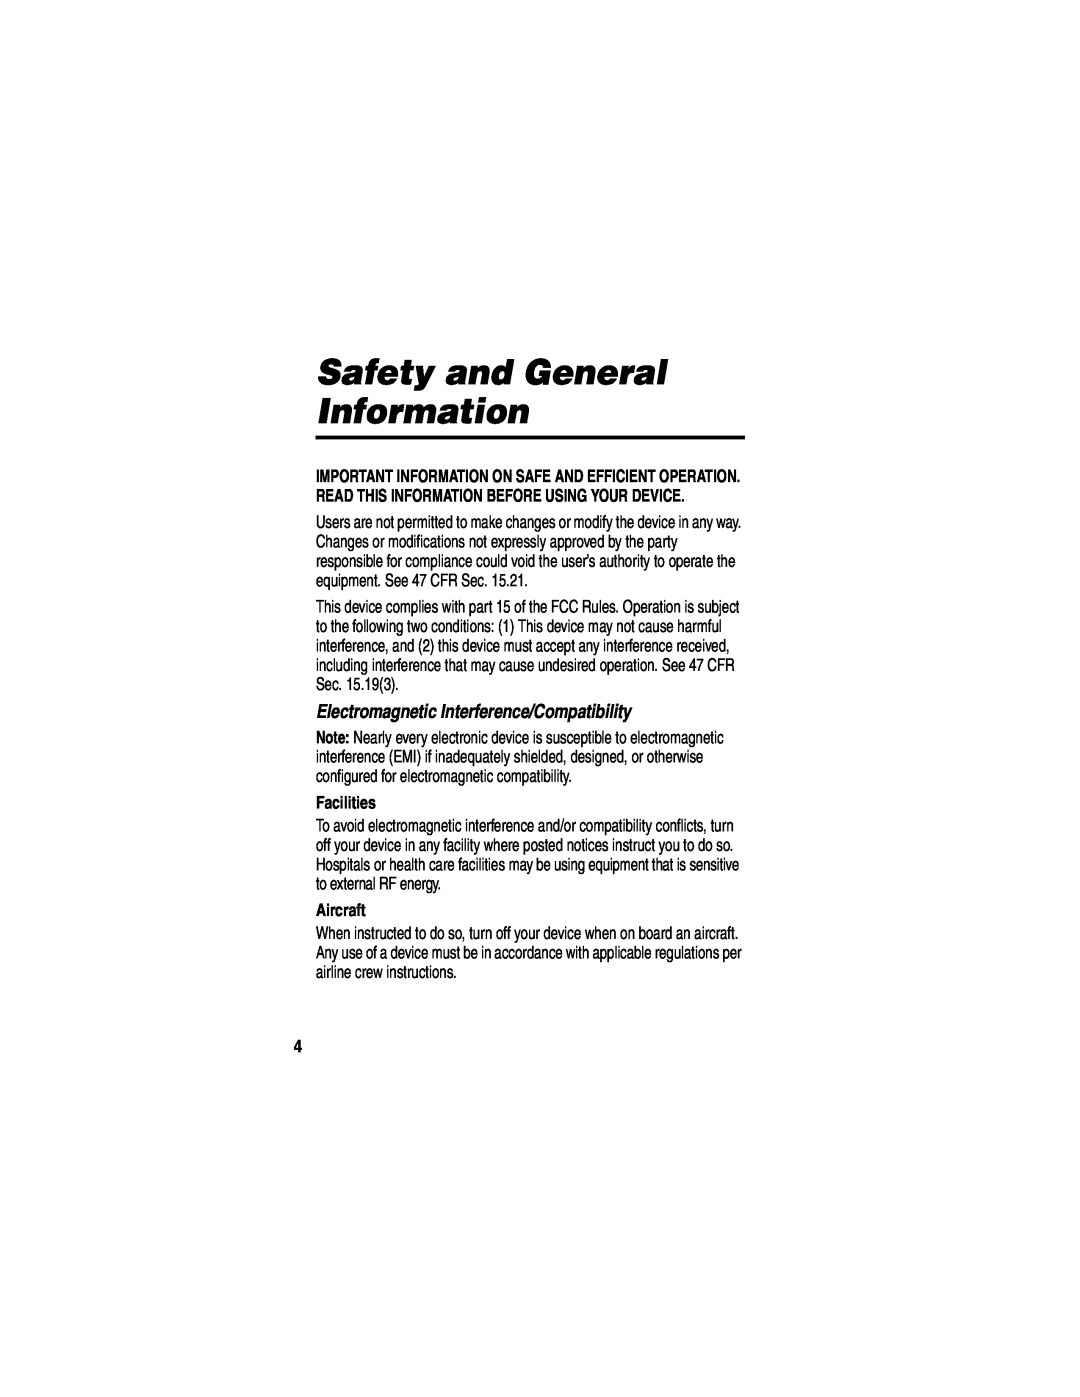 Motorola HF850 manual Safety and General Information, Electromagnetic Interference/Compatibility, Facilities, Aircraft 